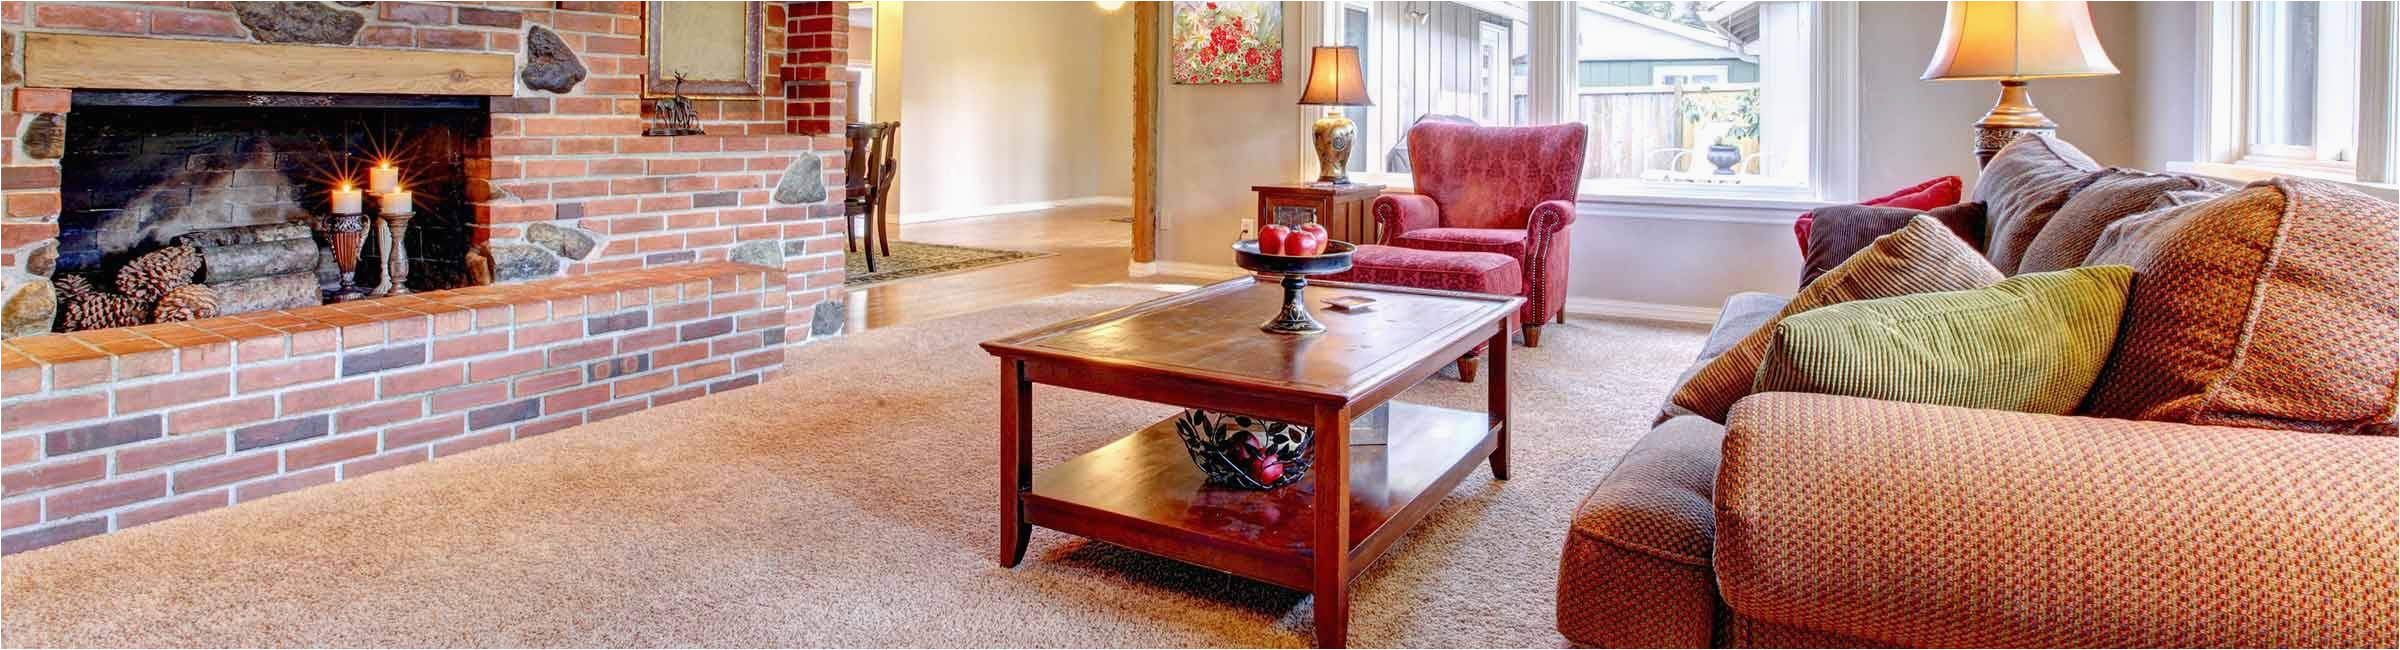 Area Rug Cleaning Bend oregon Carpet Cleaning Bend or Interior Care Carpet Cleaning